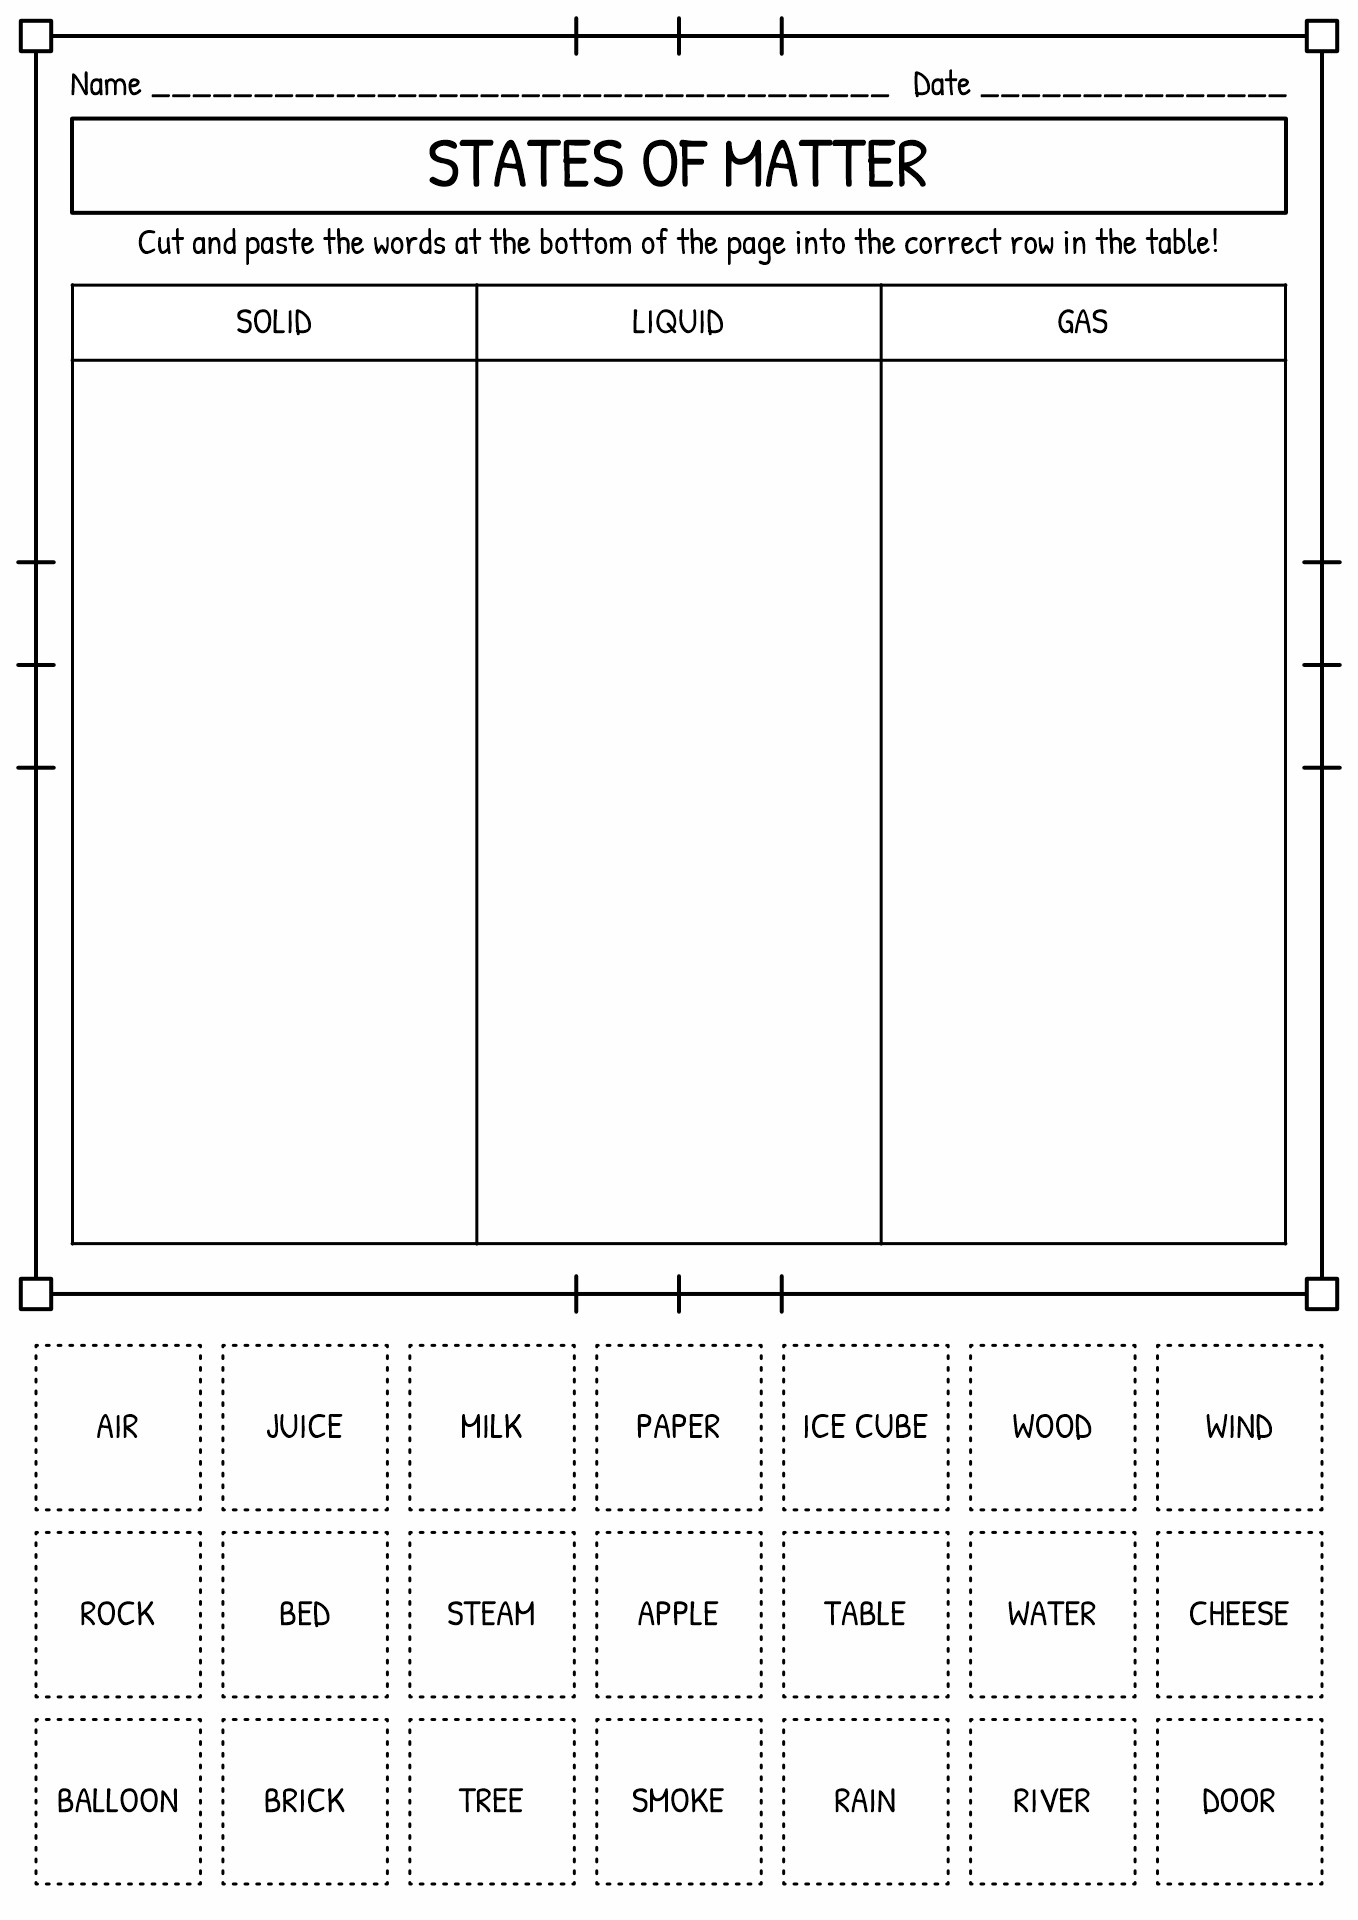 States of Matter Cut and Paste Worksheet